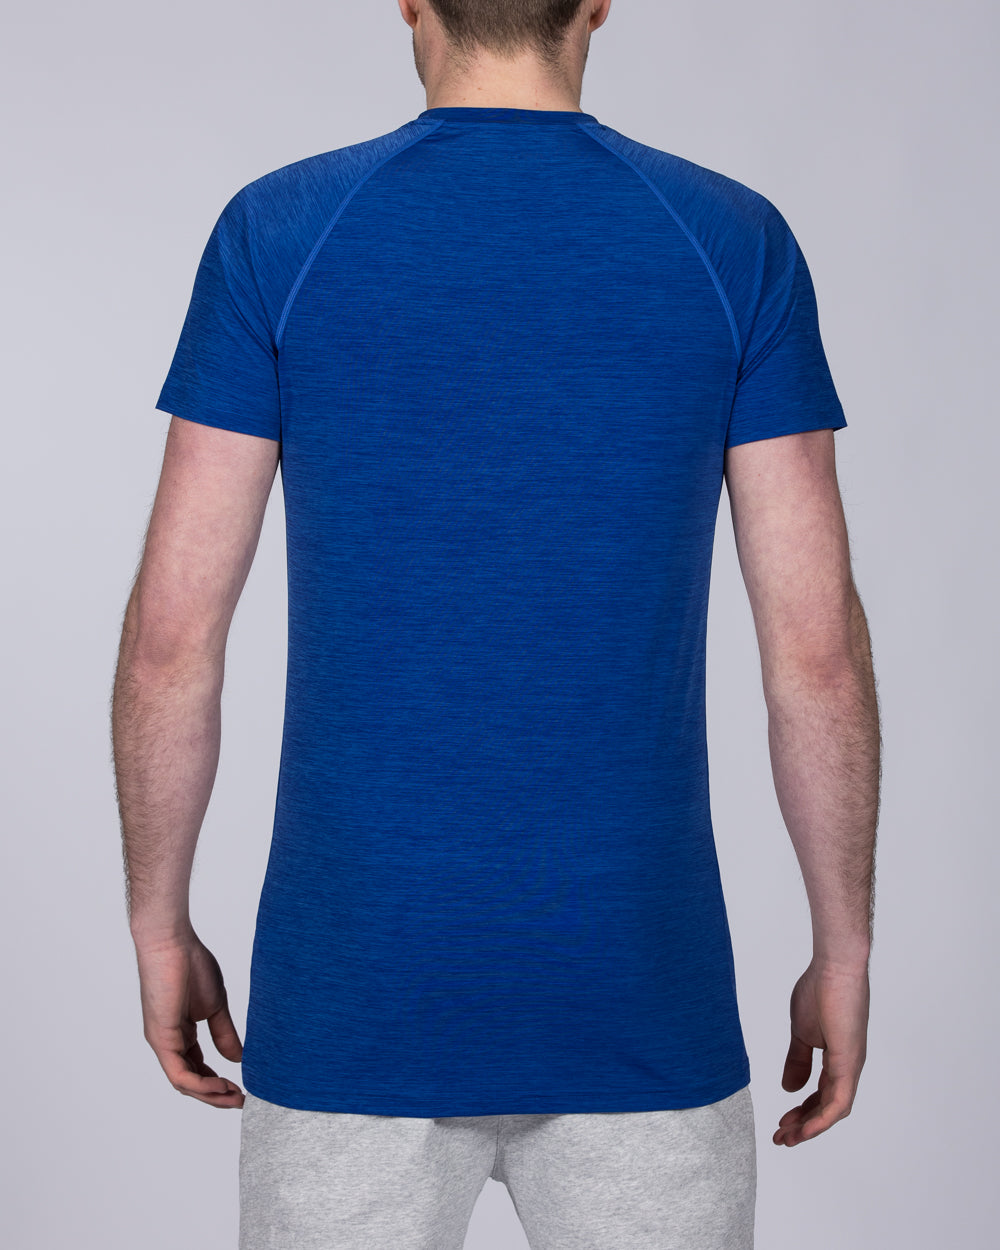 2t Tall Athletic Training Top (blue)